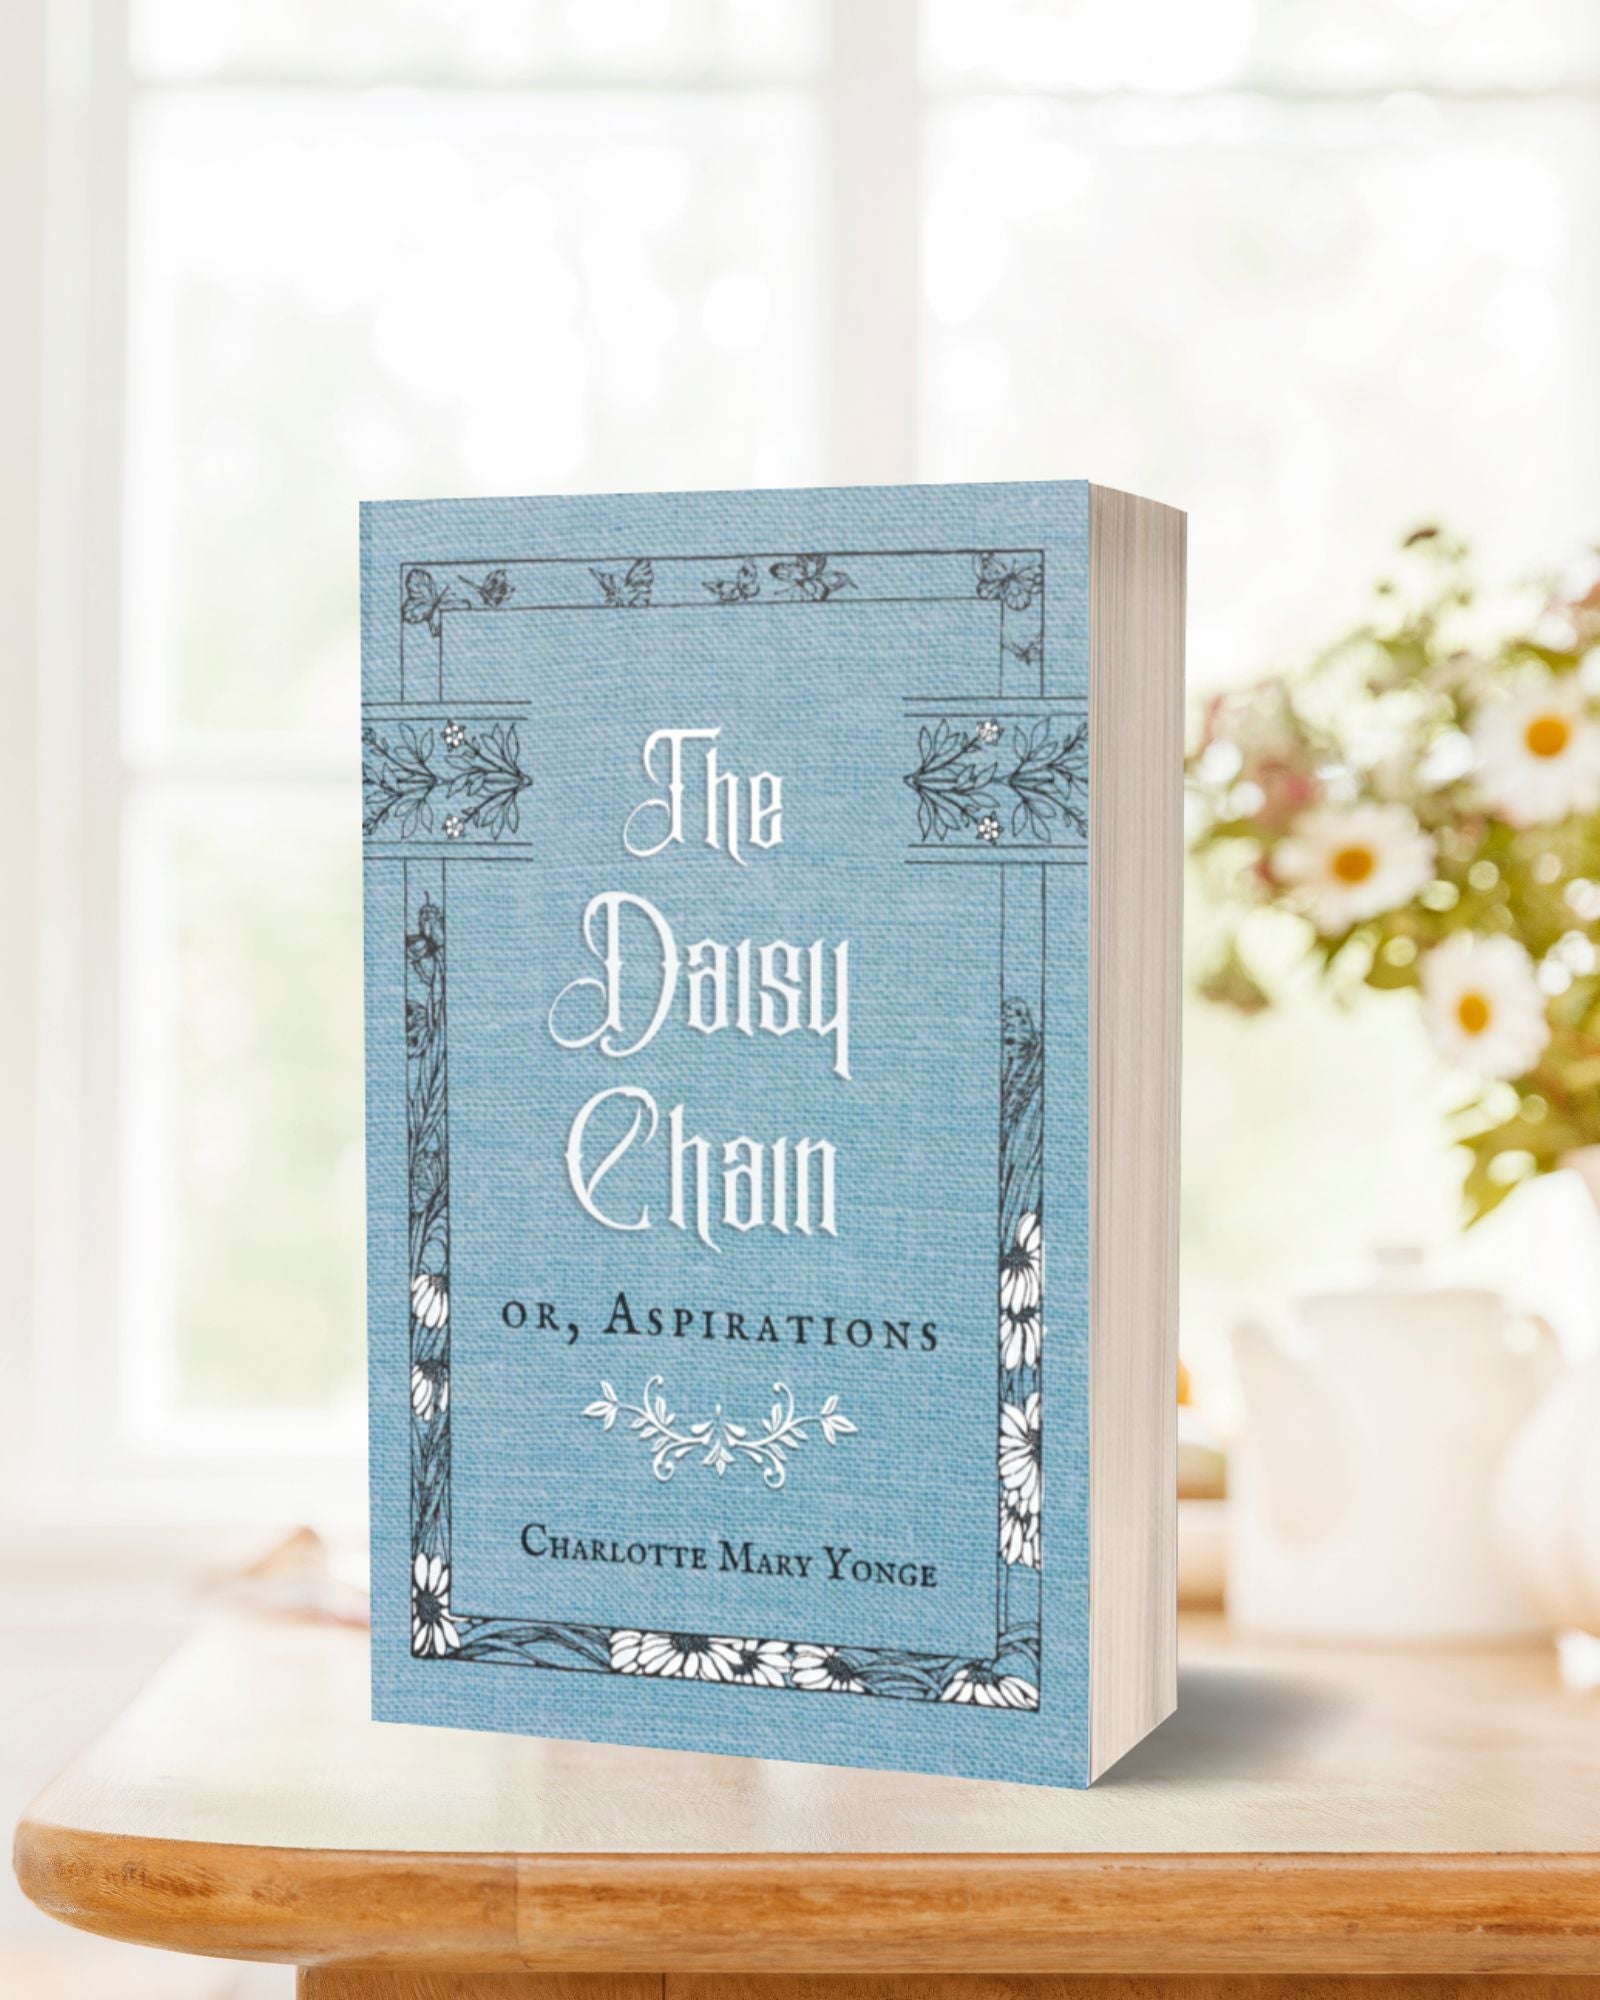 The massive paperback edition of the blue and white book, "The Daisy Chain or, Aspirations" standing on a light table in front of a blurred white background.